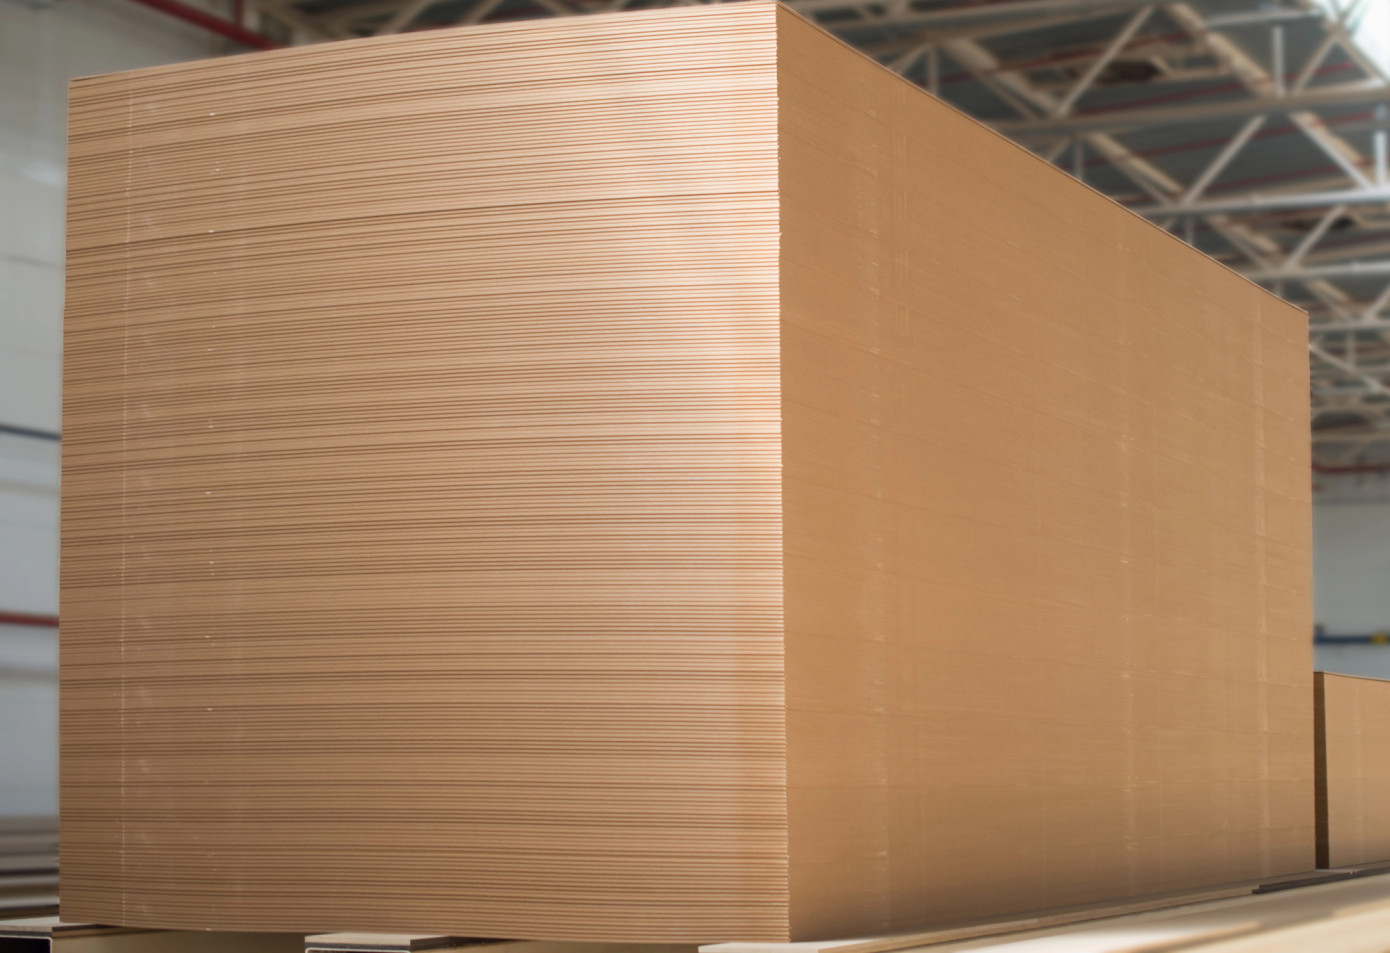 In March, price for plywood imported to Japan up 1.5%